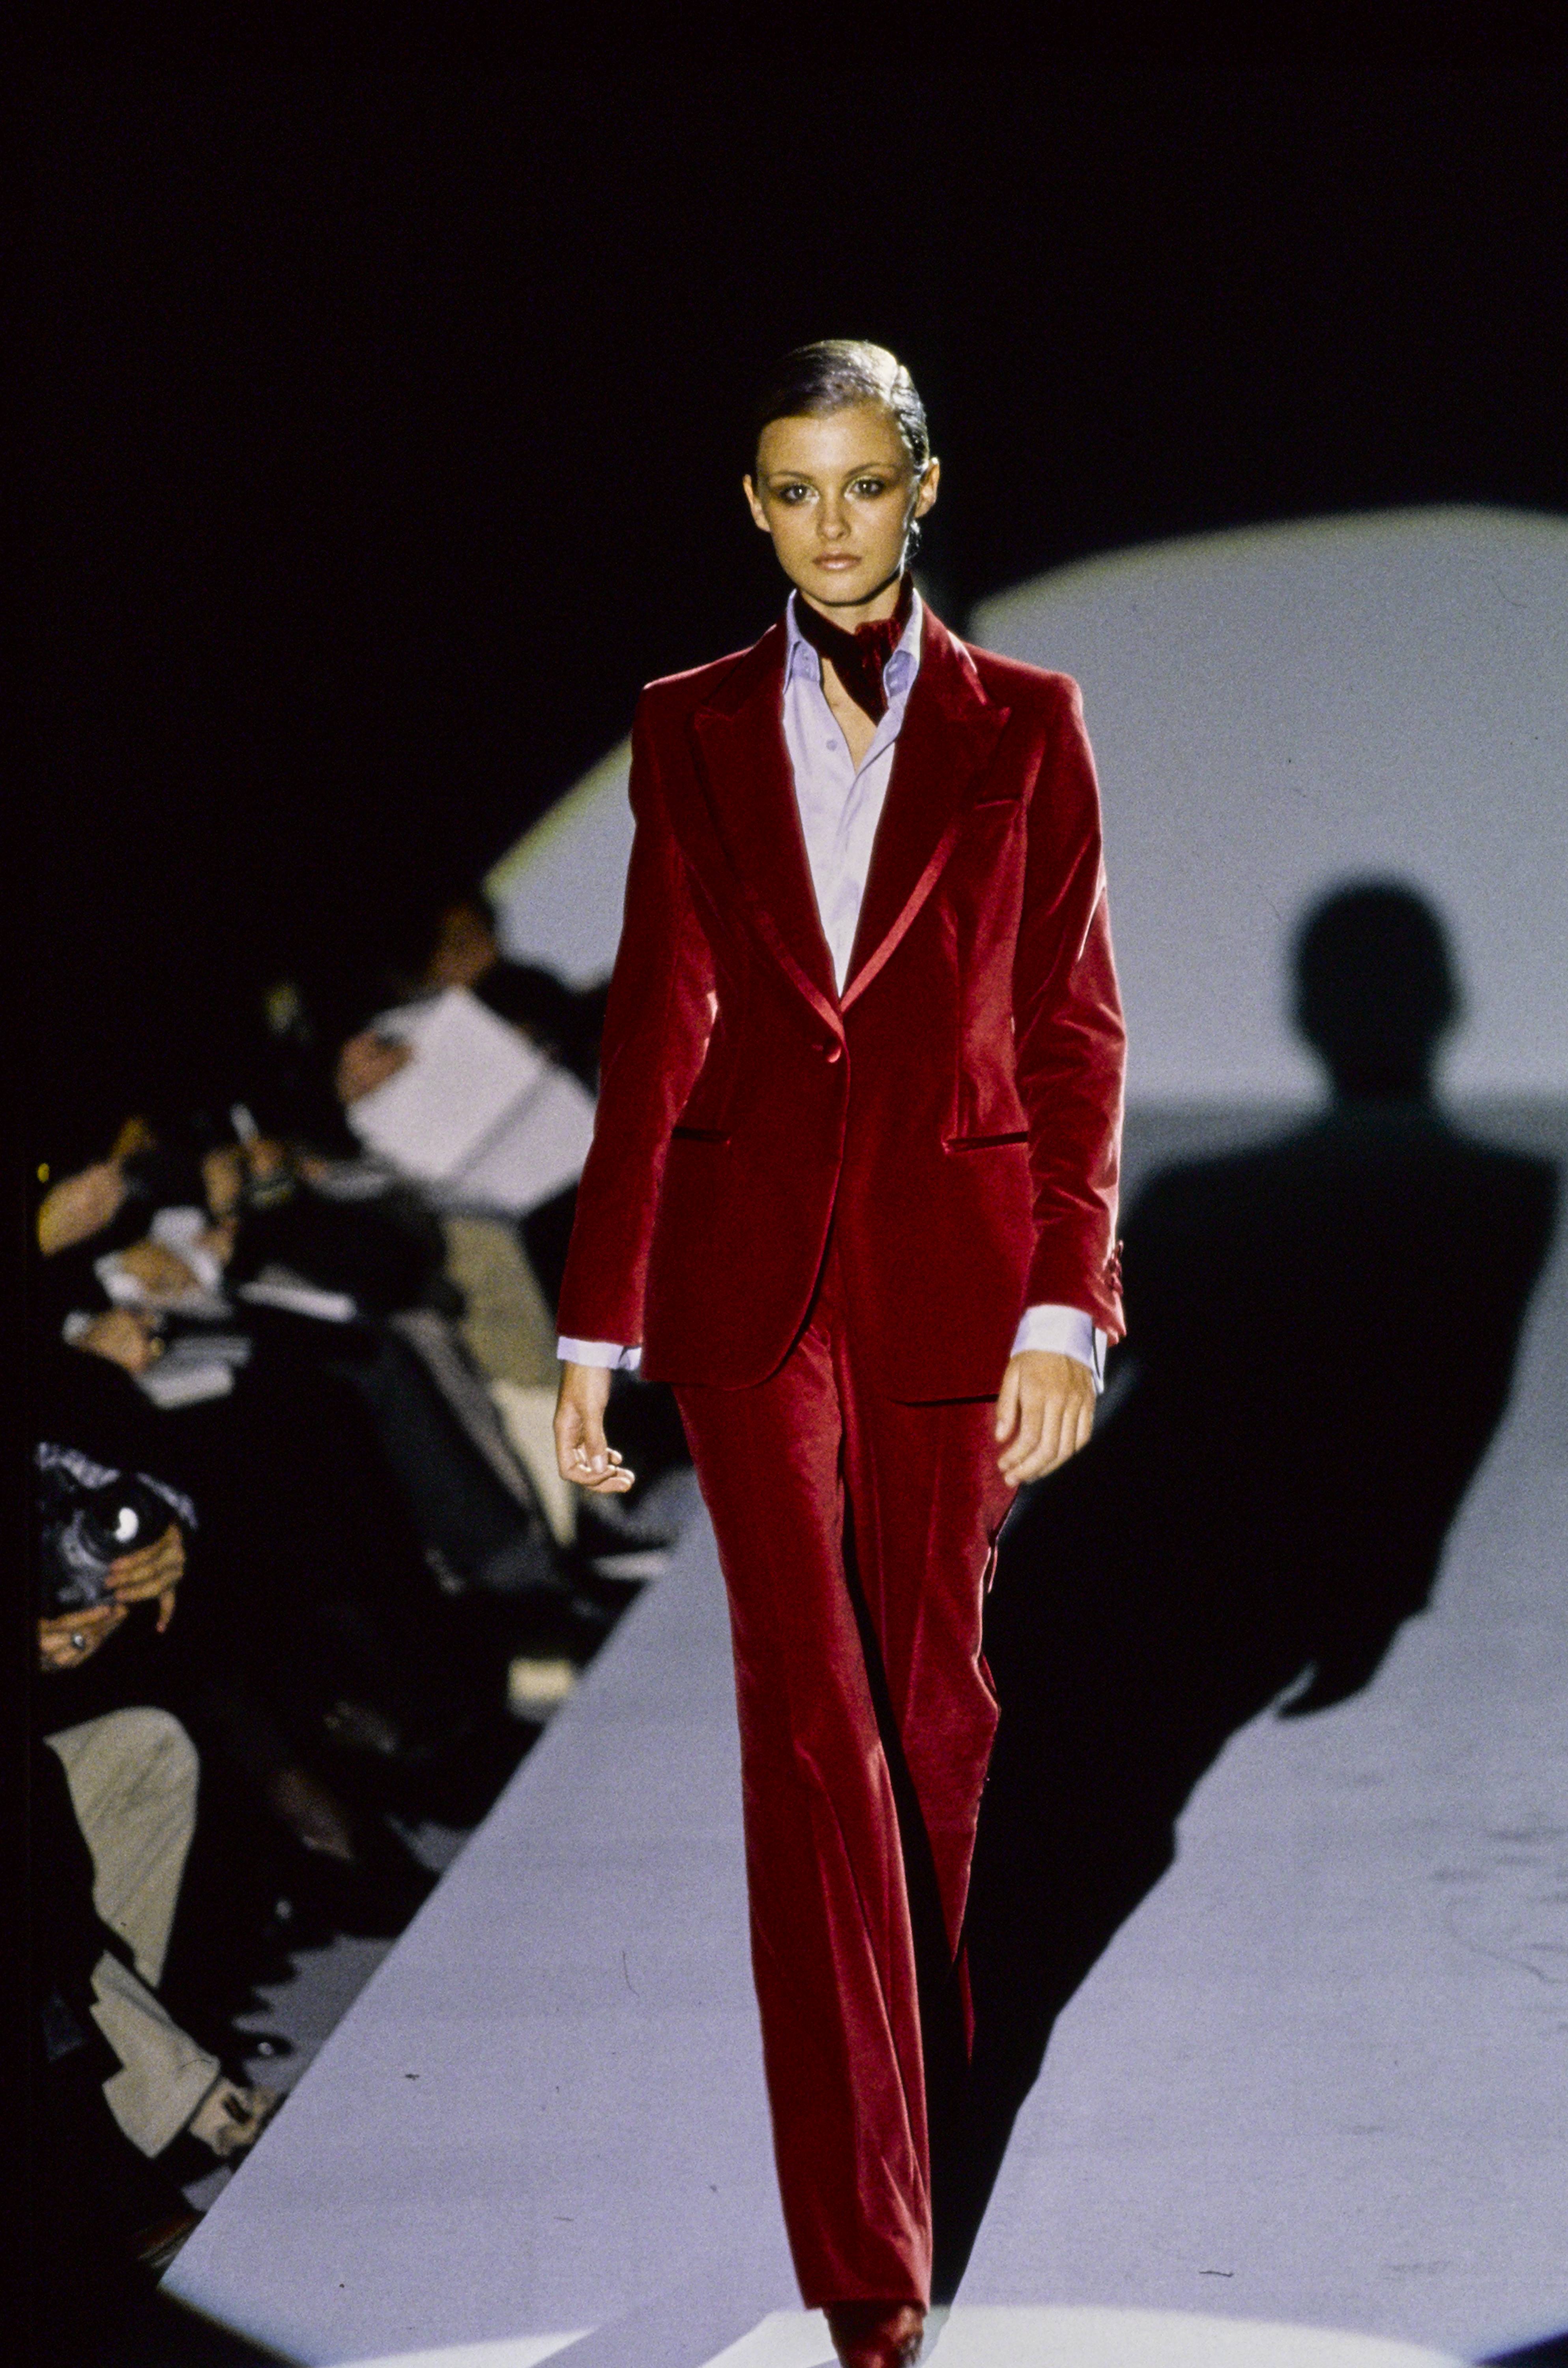 Best Fashion Collection Runway Shows Of The 90s